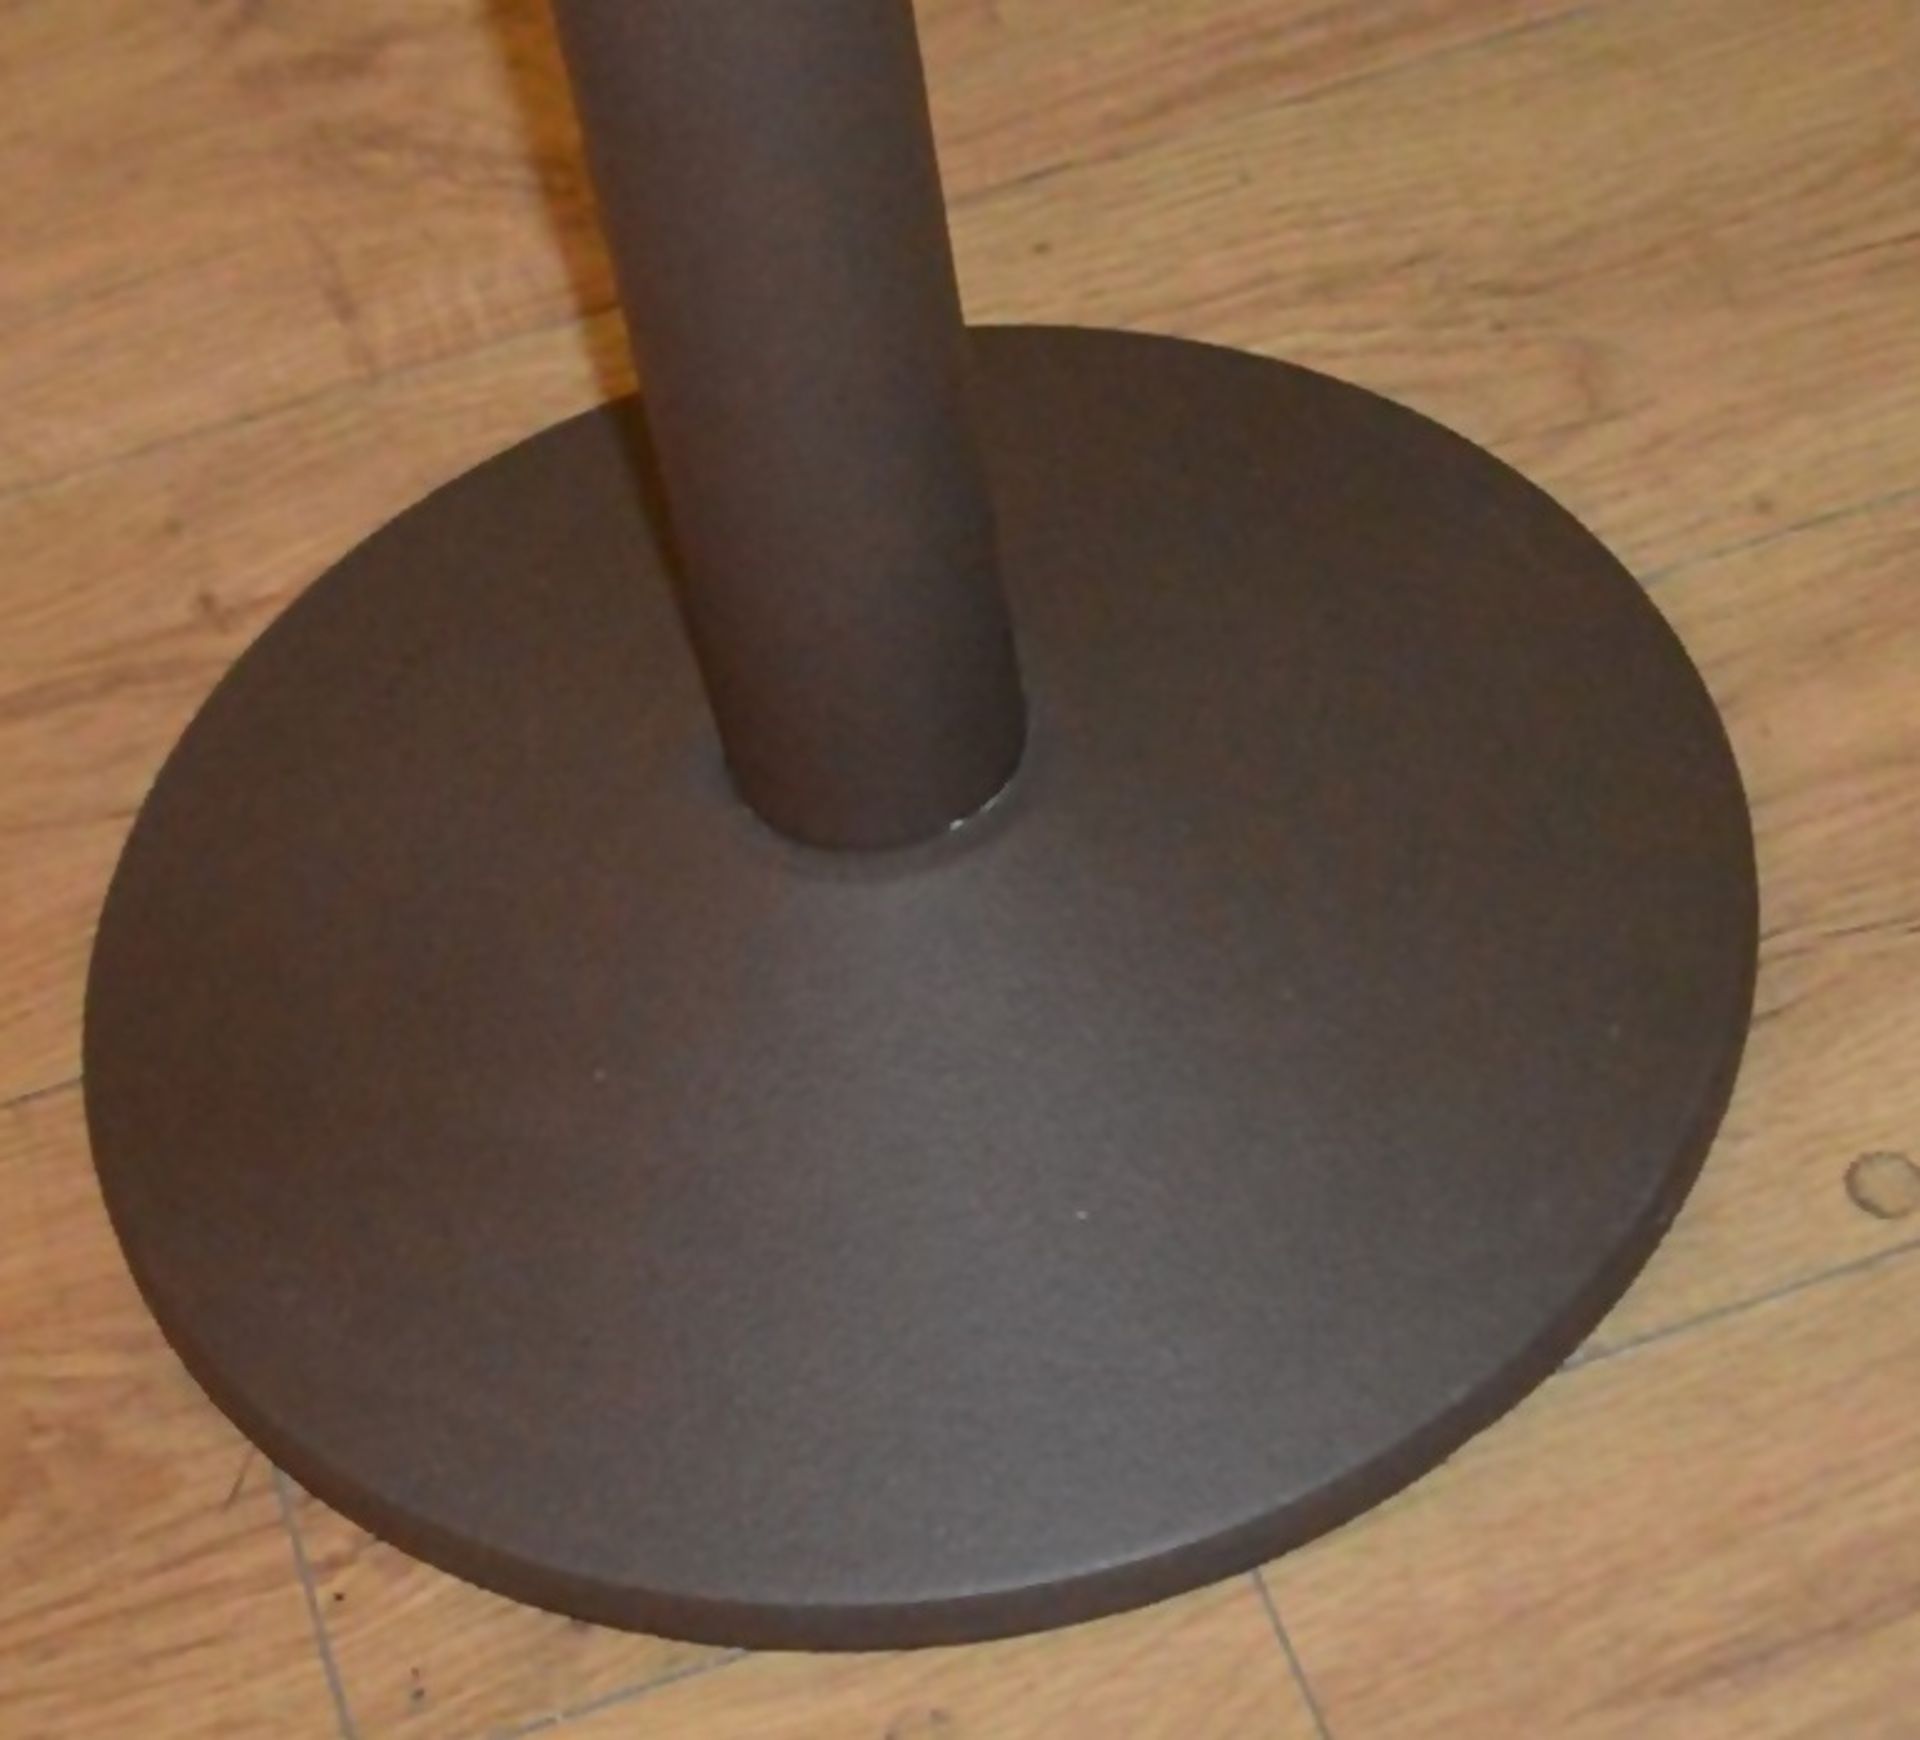 1 x Stone-Topped Occasional Table With Sturdy Metal Base - Dimensions: Height 55 x Diameter 50cm - - Image 5 of 5